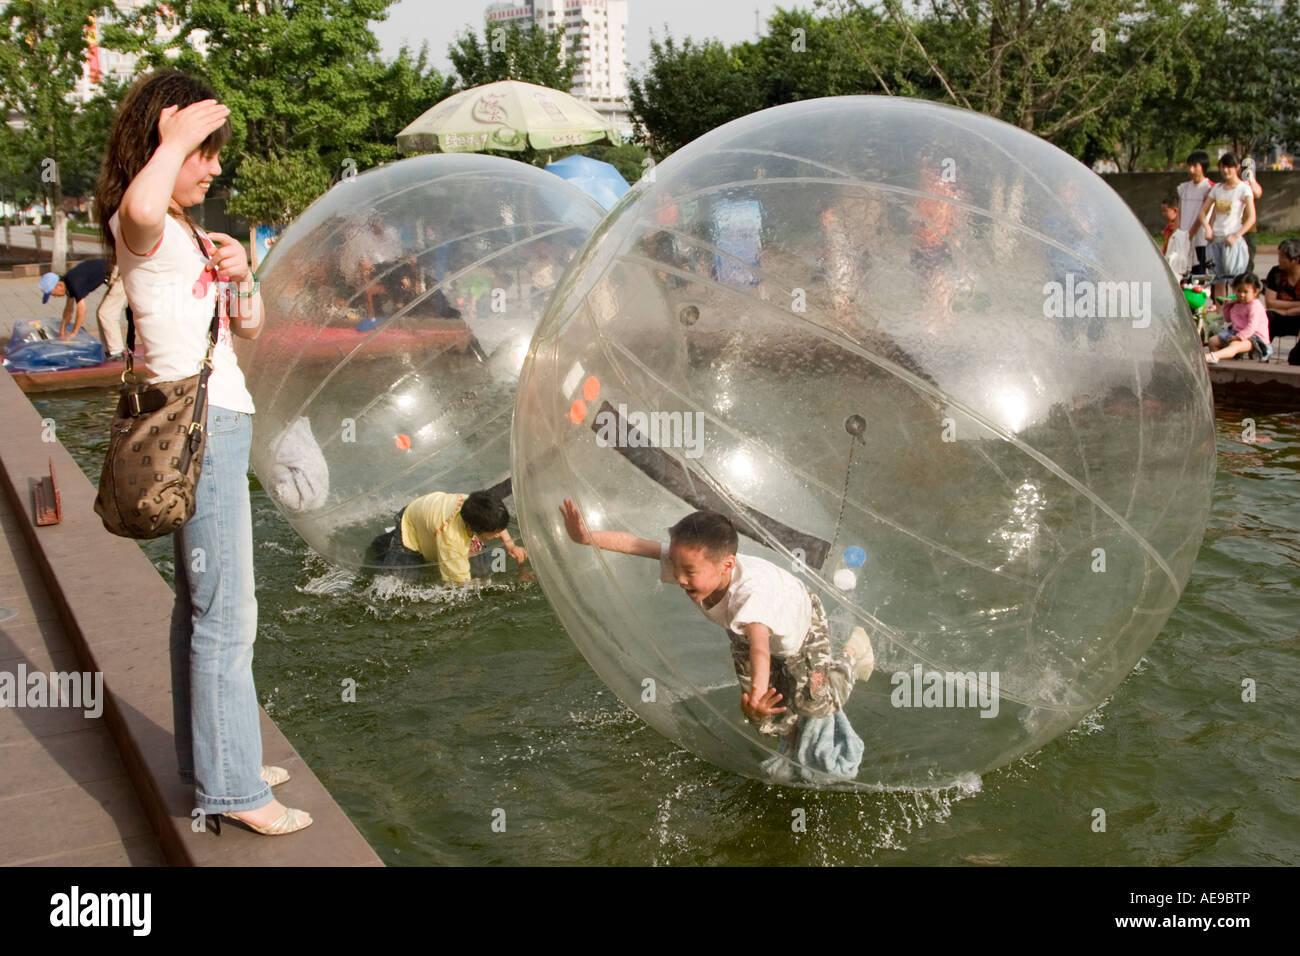 children-play-in-a-plastic-bubble-or-cub